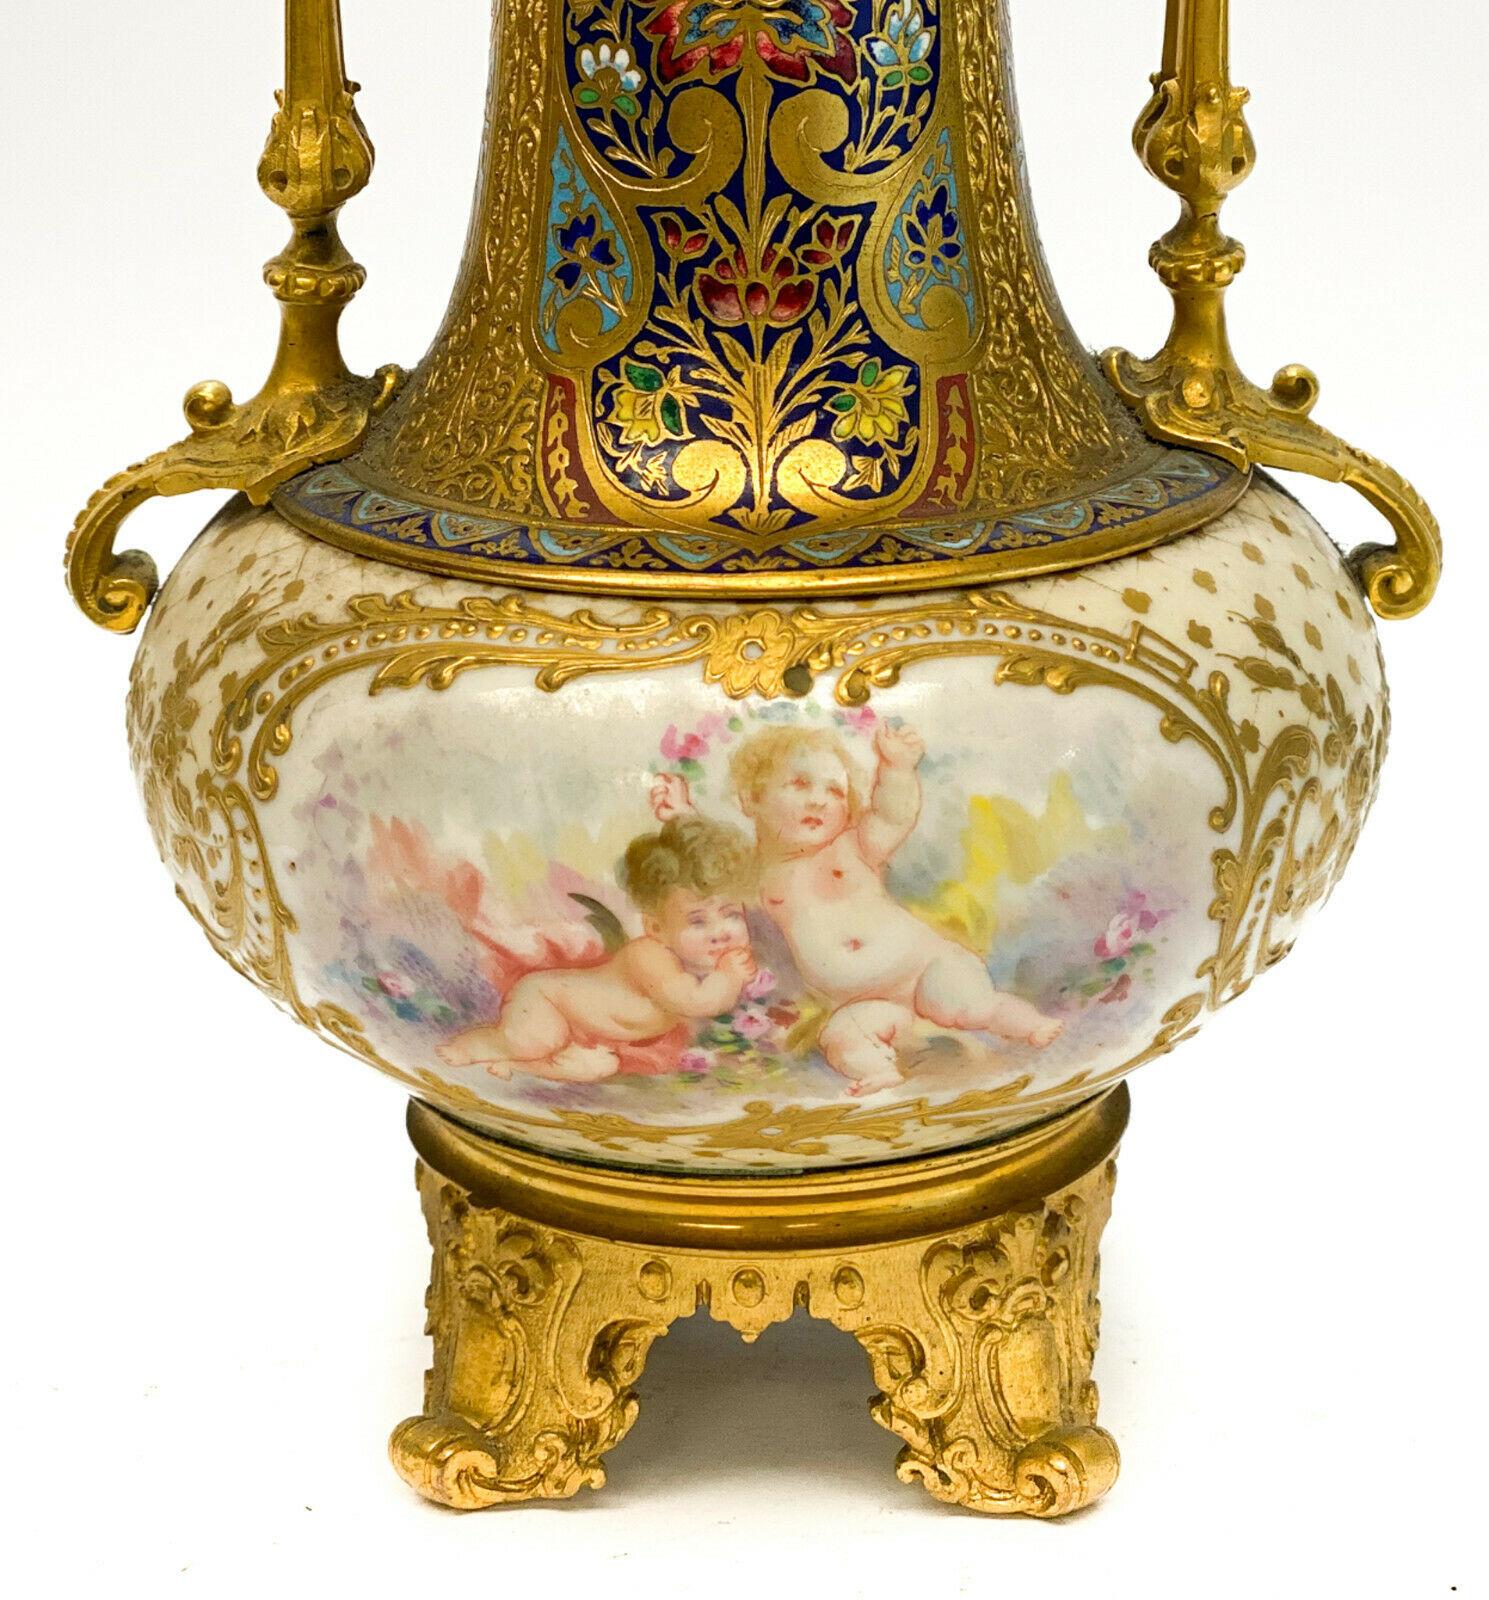 Sevres porcelain champleve enamel gilt bronze mounted twin handled vase, circa 1900. Hand painted floral bouquets to the central areas of the porcelain with gilt foliate scrolls. multicolored floral champleve enamel decoration to the gilt bronze. We